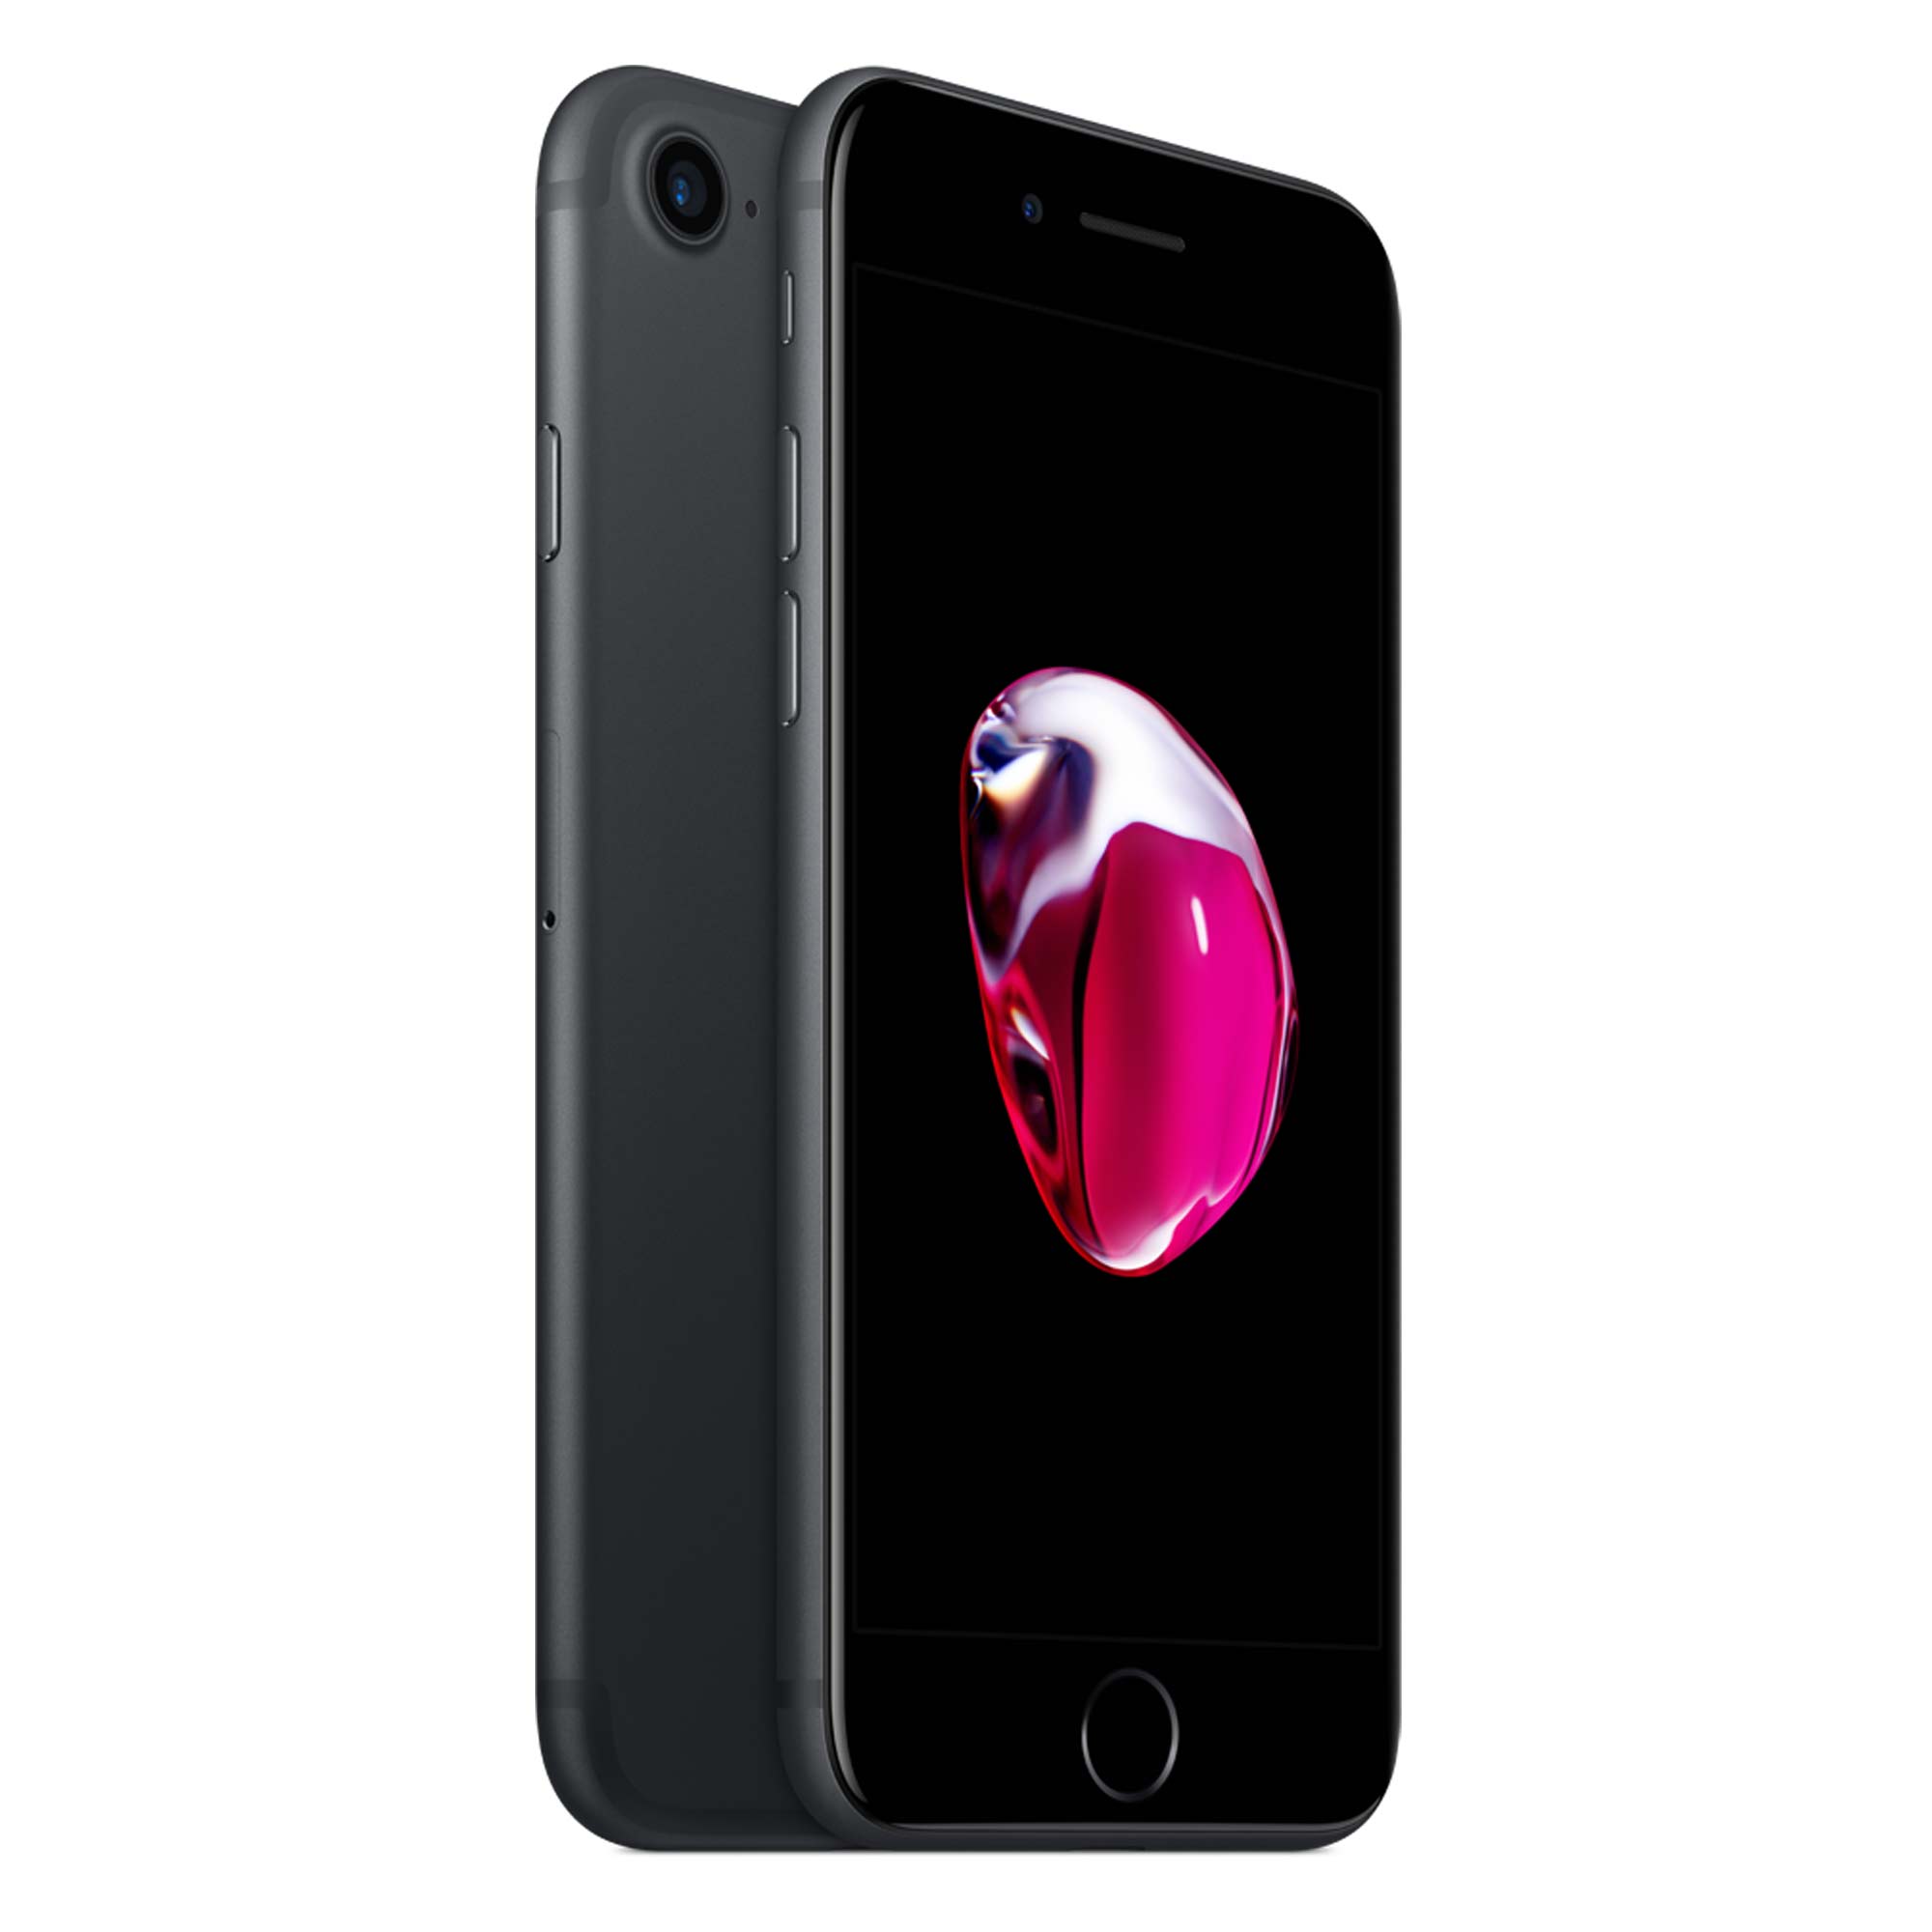 Simple Mobile Apple iPhone 7, 32GB, Black- Prepaid Smartphone [Locked to Carrier- Simple Mobile] - image 1 of 2